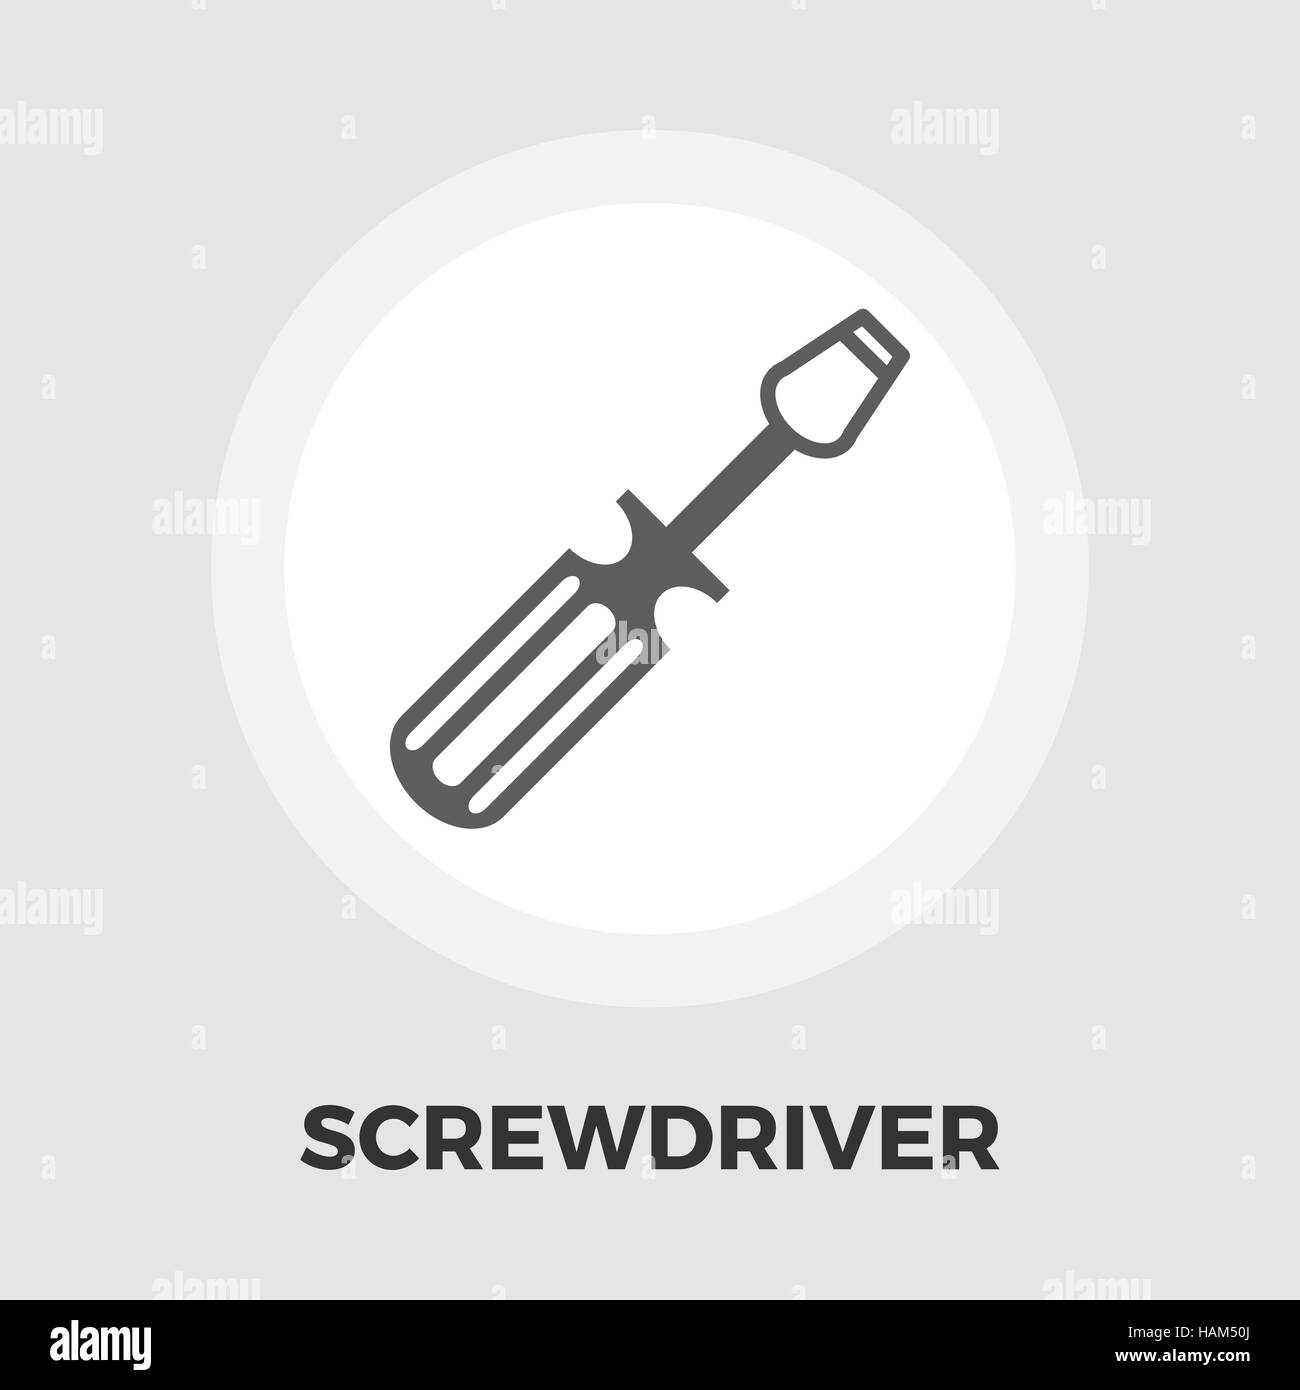 Screwdriver icon vector. Flat icon isolated on the white background. Editable EPS file. Vector illustration. Stock Vector